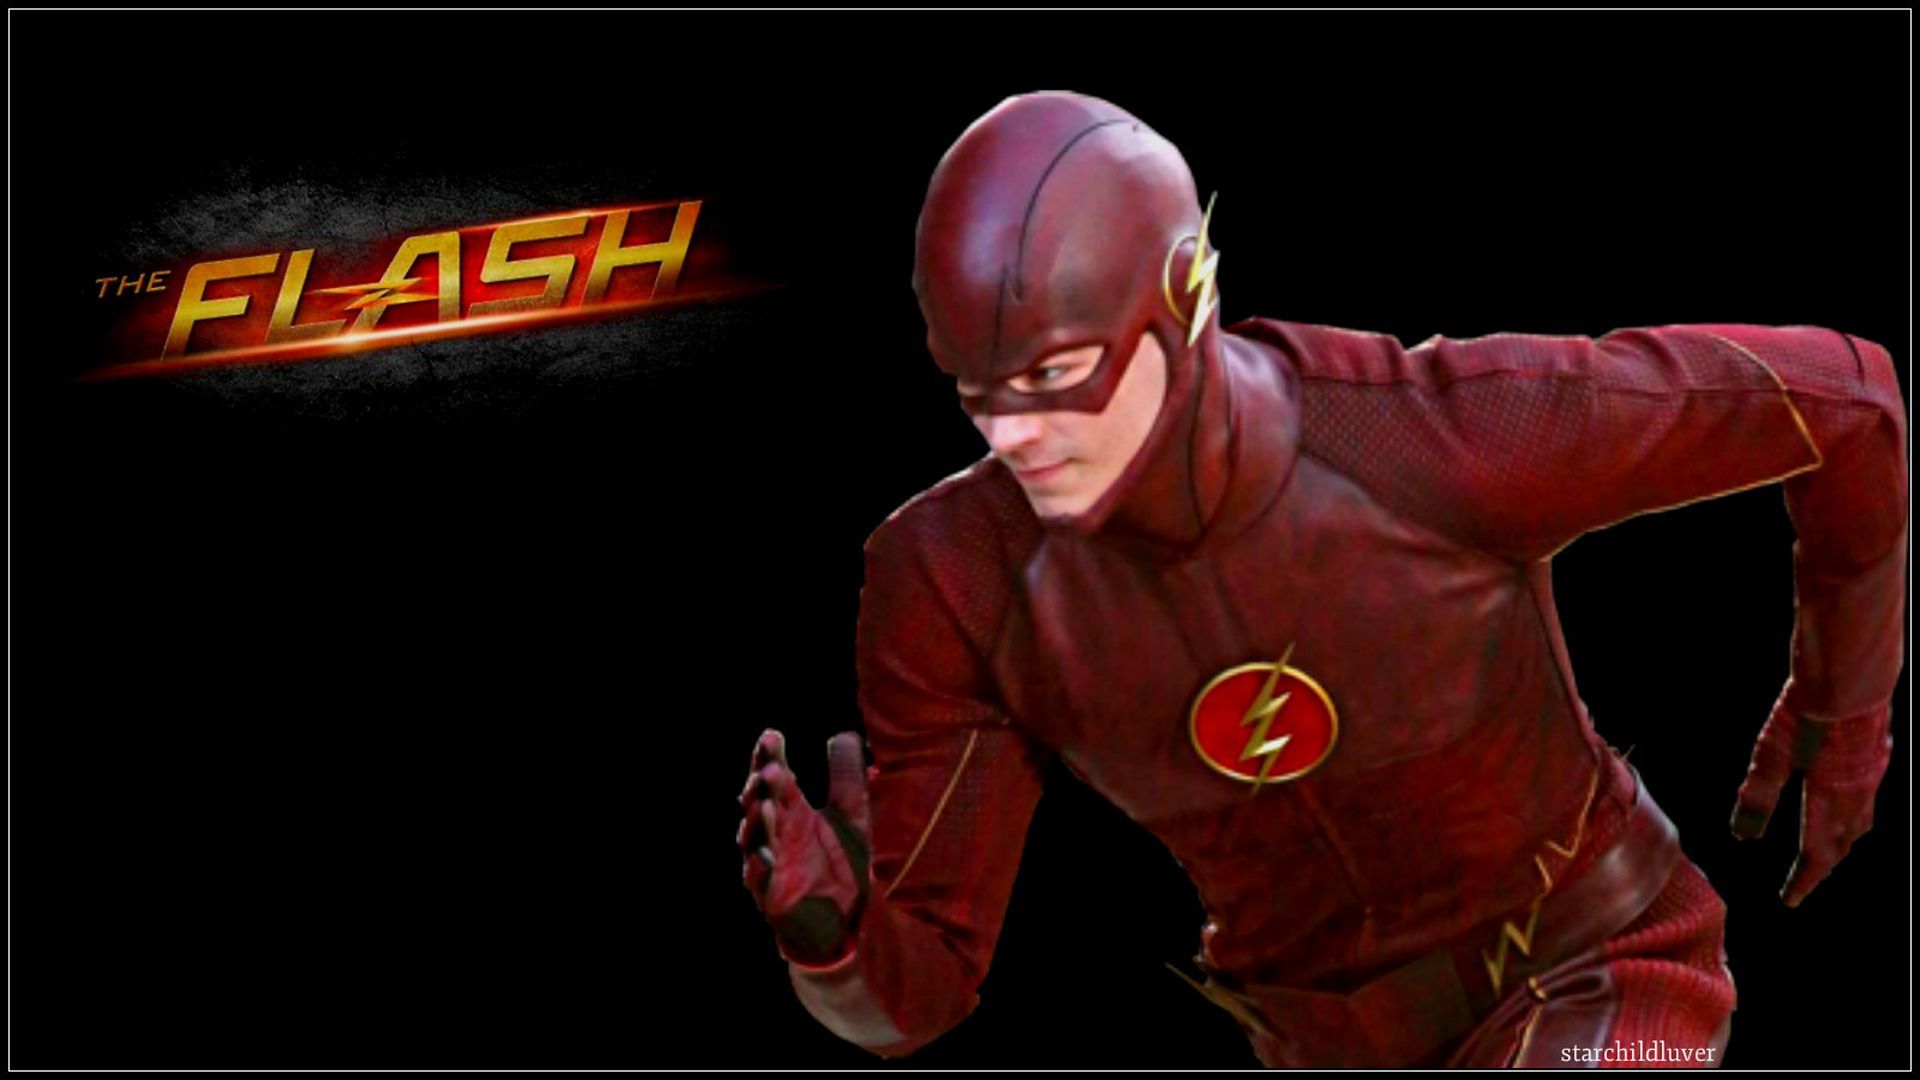 The Flash Wallpaper Backgrounds | HD Movie Wallpapers